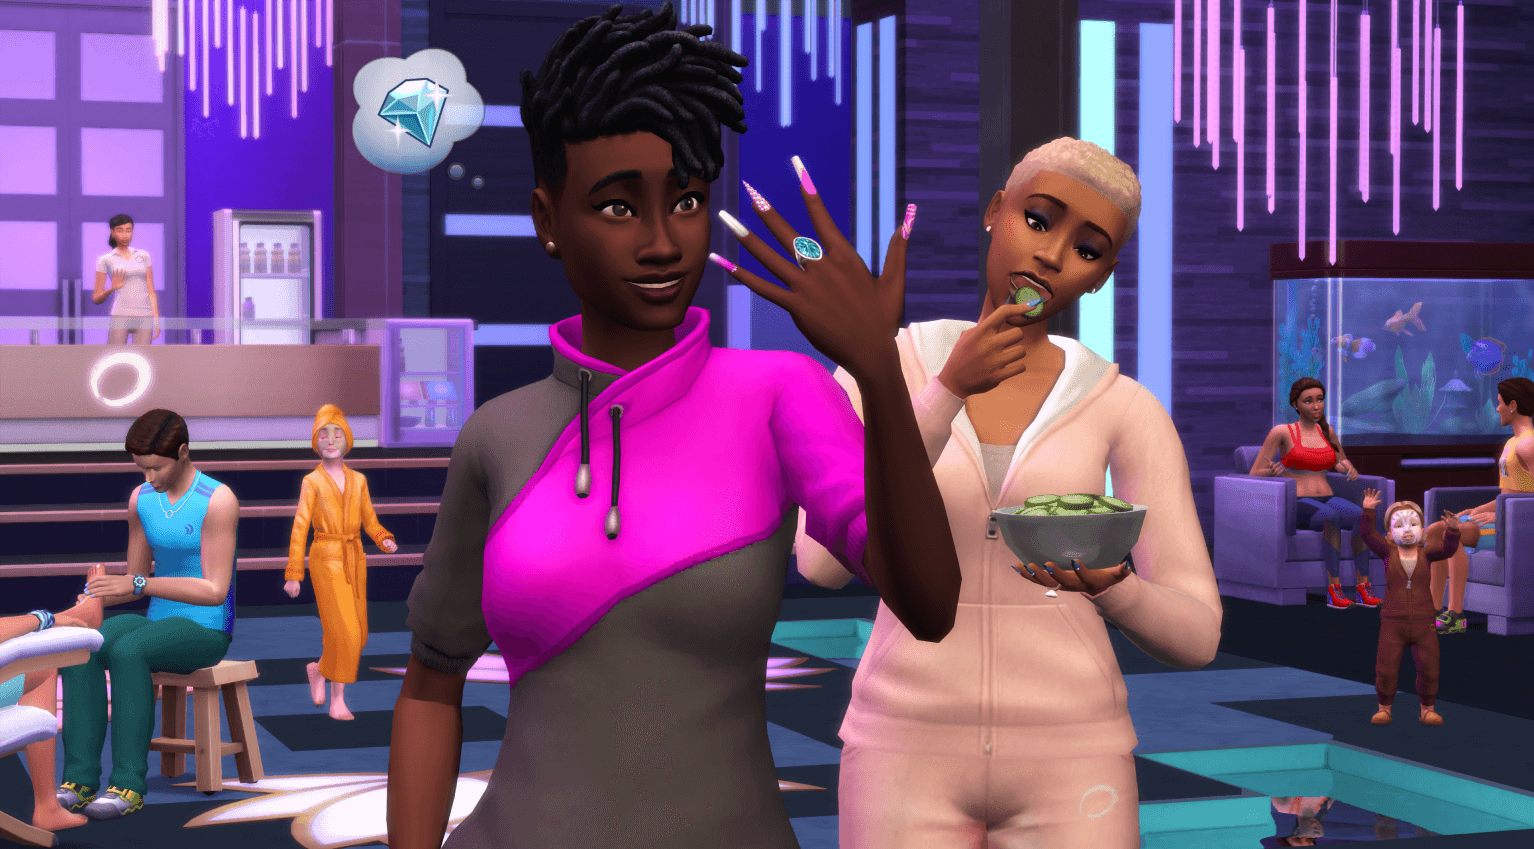 The Sims 4 Reviews, Pros and Cons